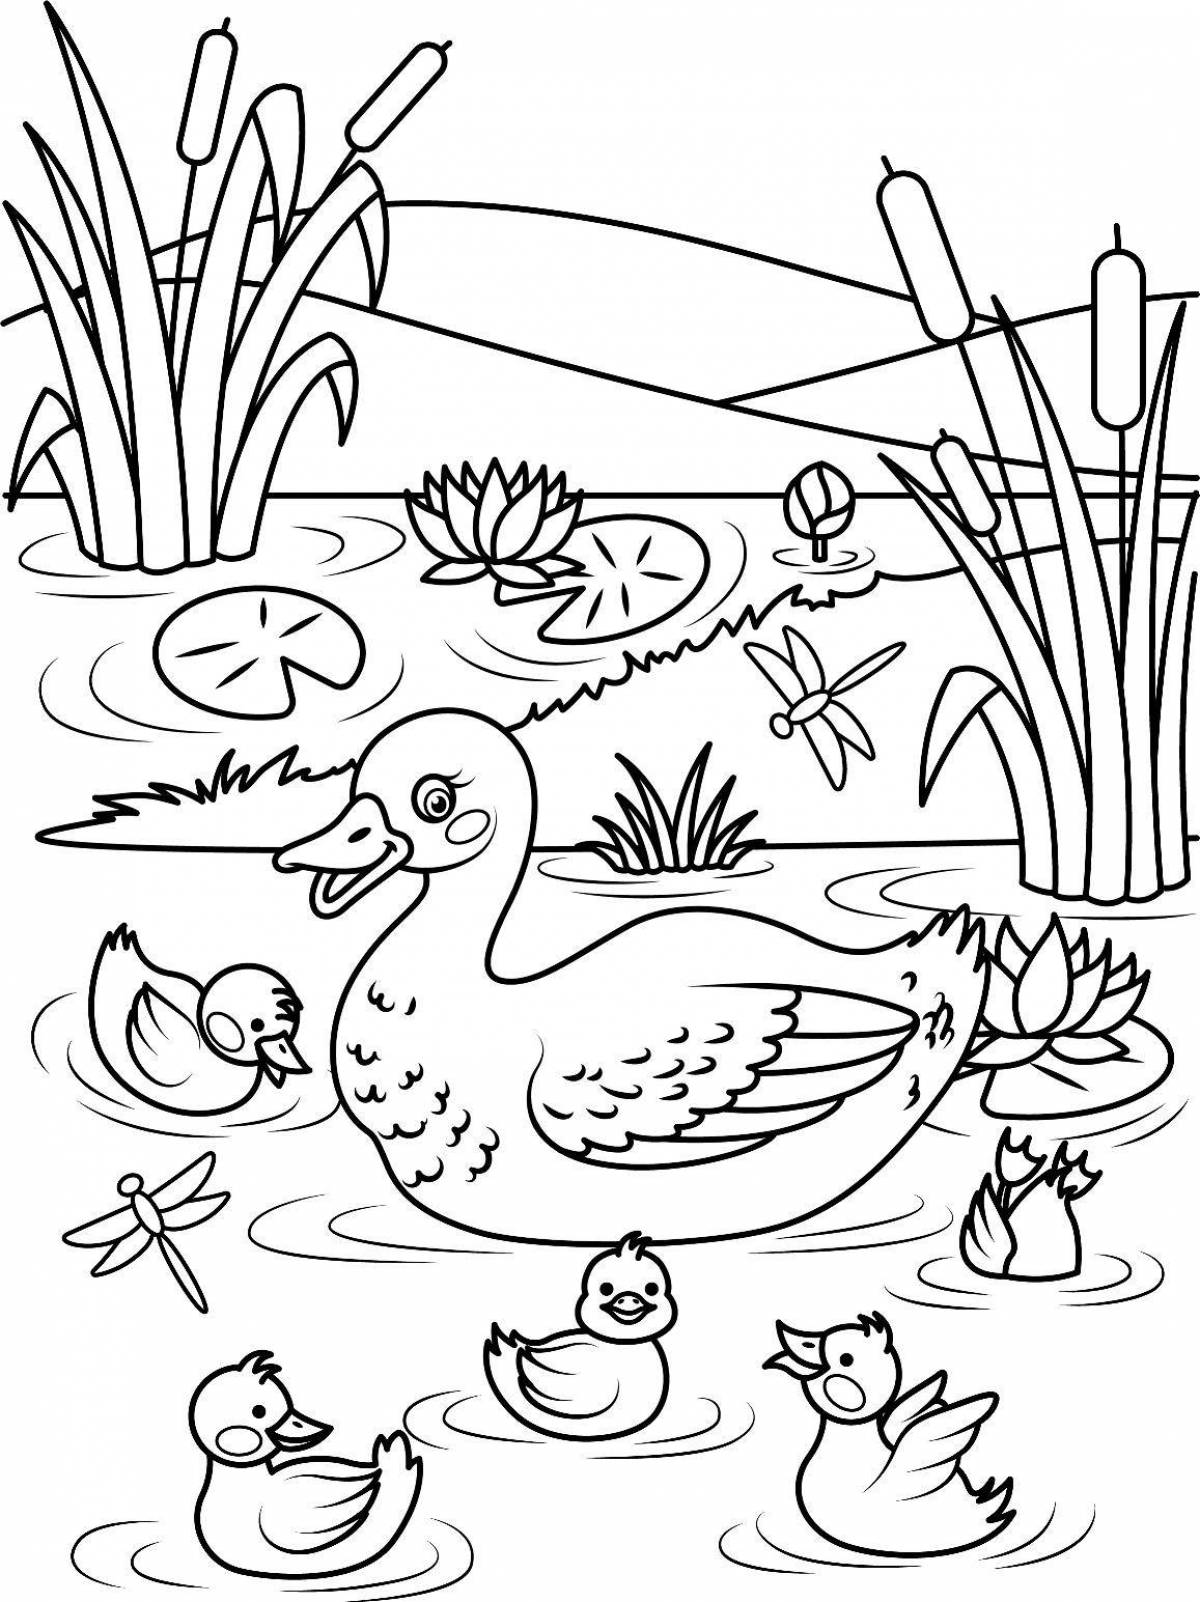 Color-crazy duck coloring page for 3-4 year olds